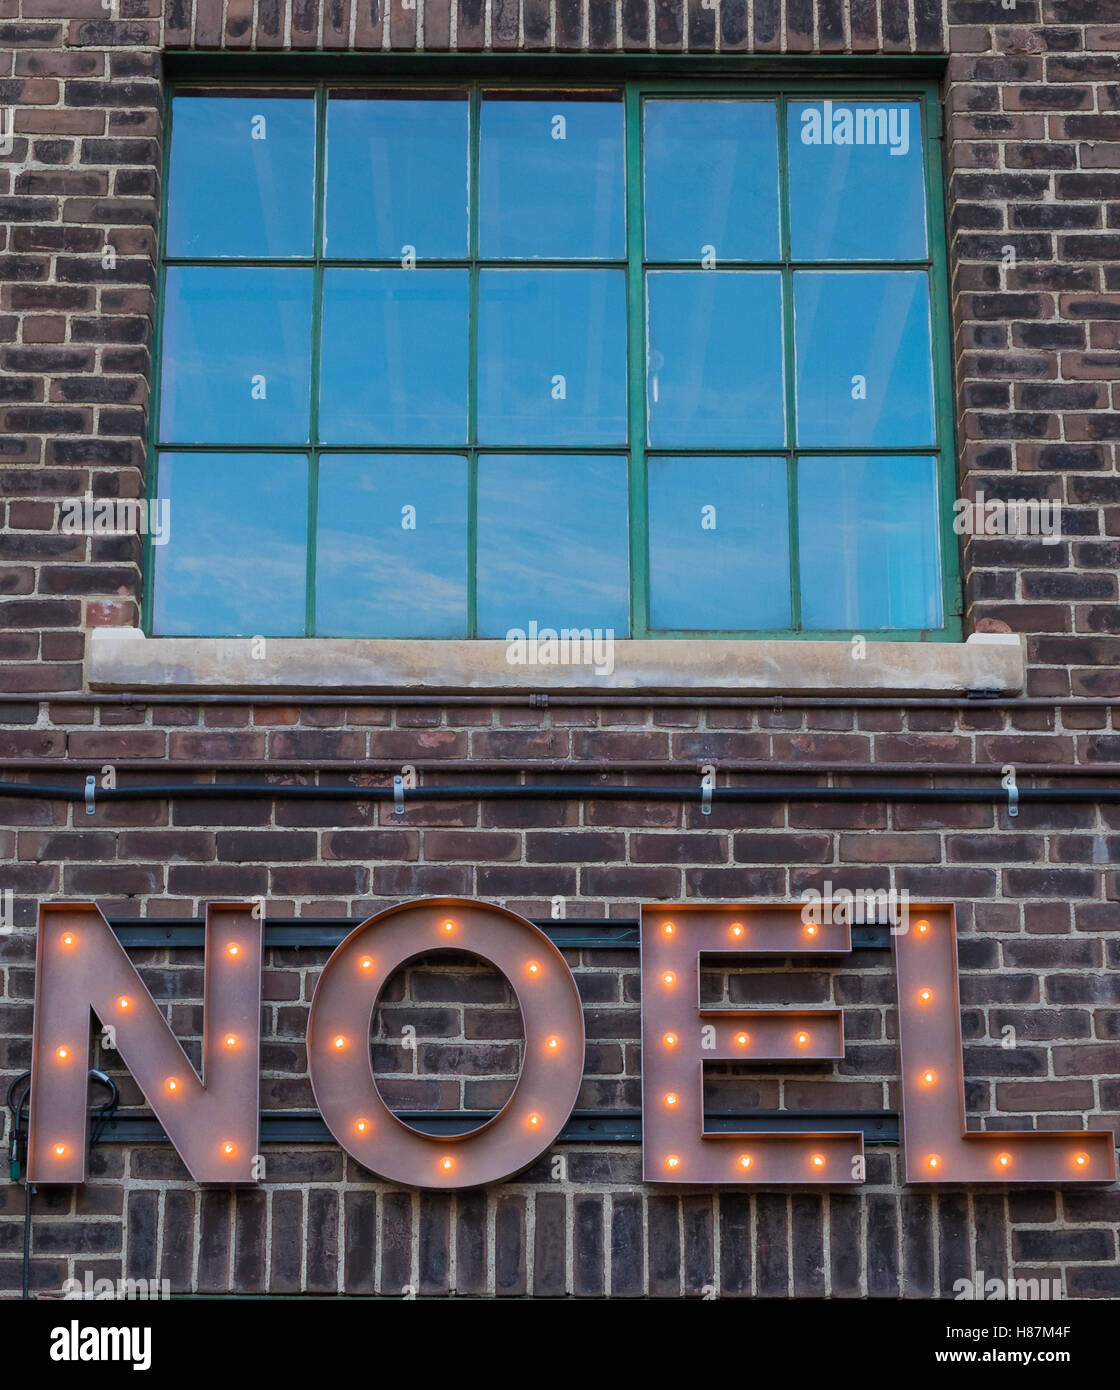 A lit Noel sign made of metal hangs on a brown brick wall. A divided light window above reflects a blue sky. Stock Photo